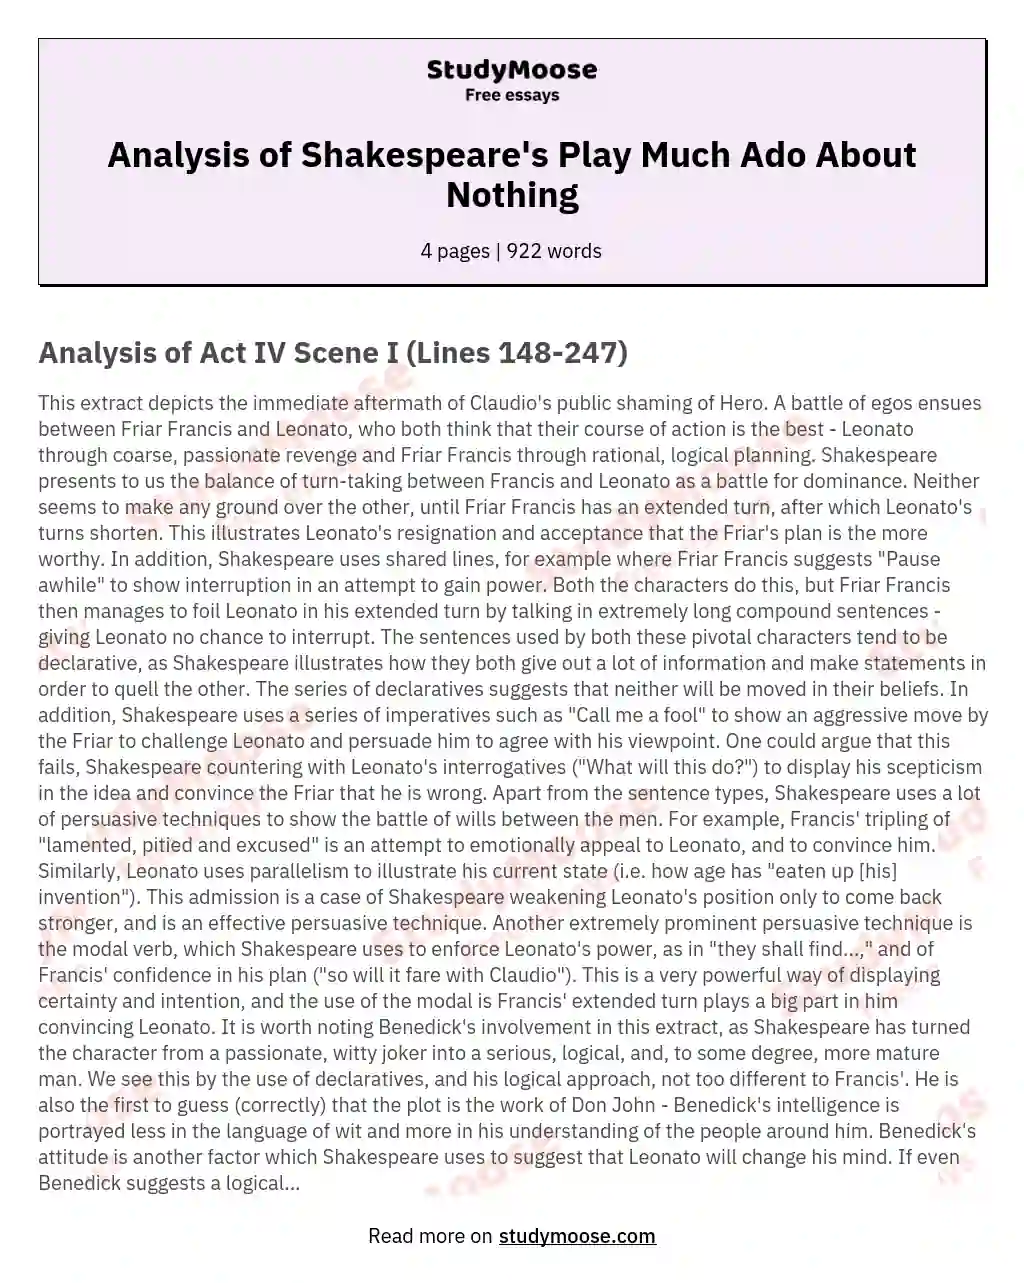 Analysis of Shakespeare's Play Much Ado About Nothing essay